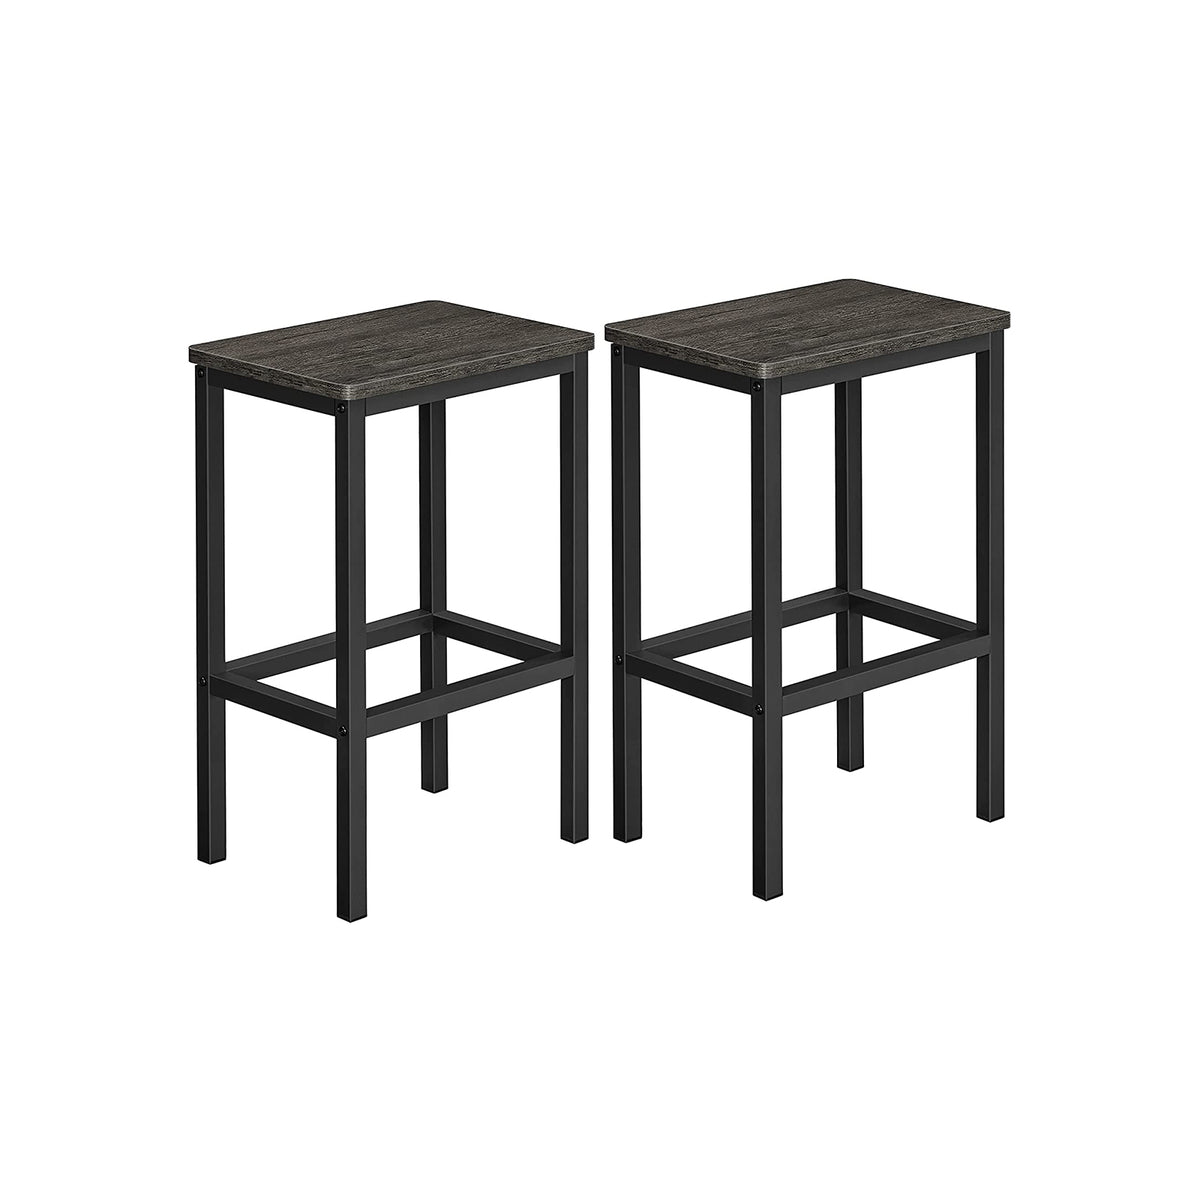  VASAGLE Bar Stools, Set of 2 Bar Chairs, Kitchen Breakfast Bar  Stools with Footrest, Industrial in Living Room, Party Room, Rustic Brown  and Black ULBC65X : Everything Else